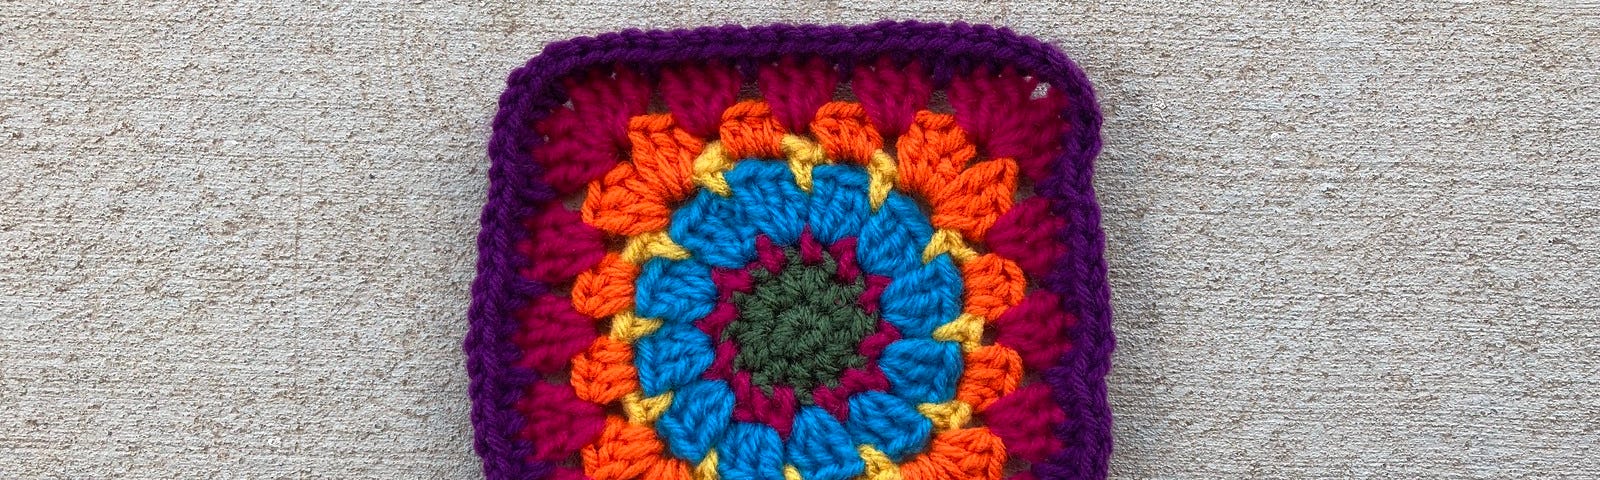 A multicolor crochet granny square that goes from circle to square